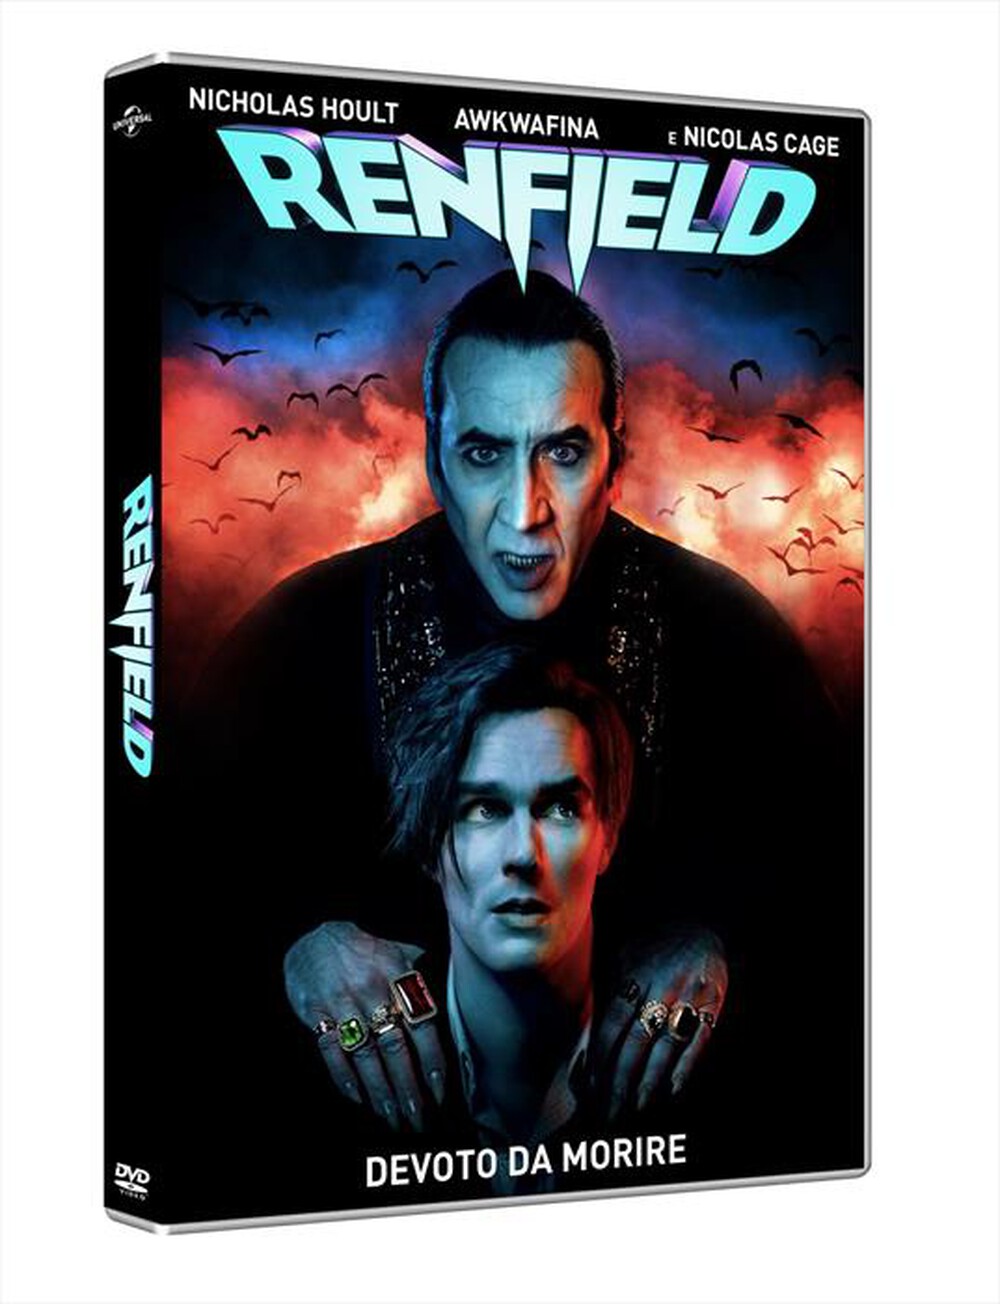 "UNIVERSAL PICTURES - Renfield"